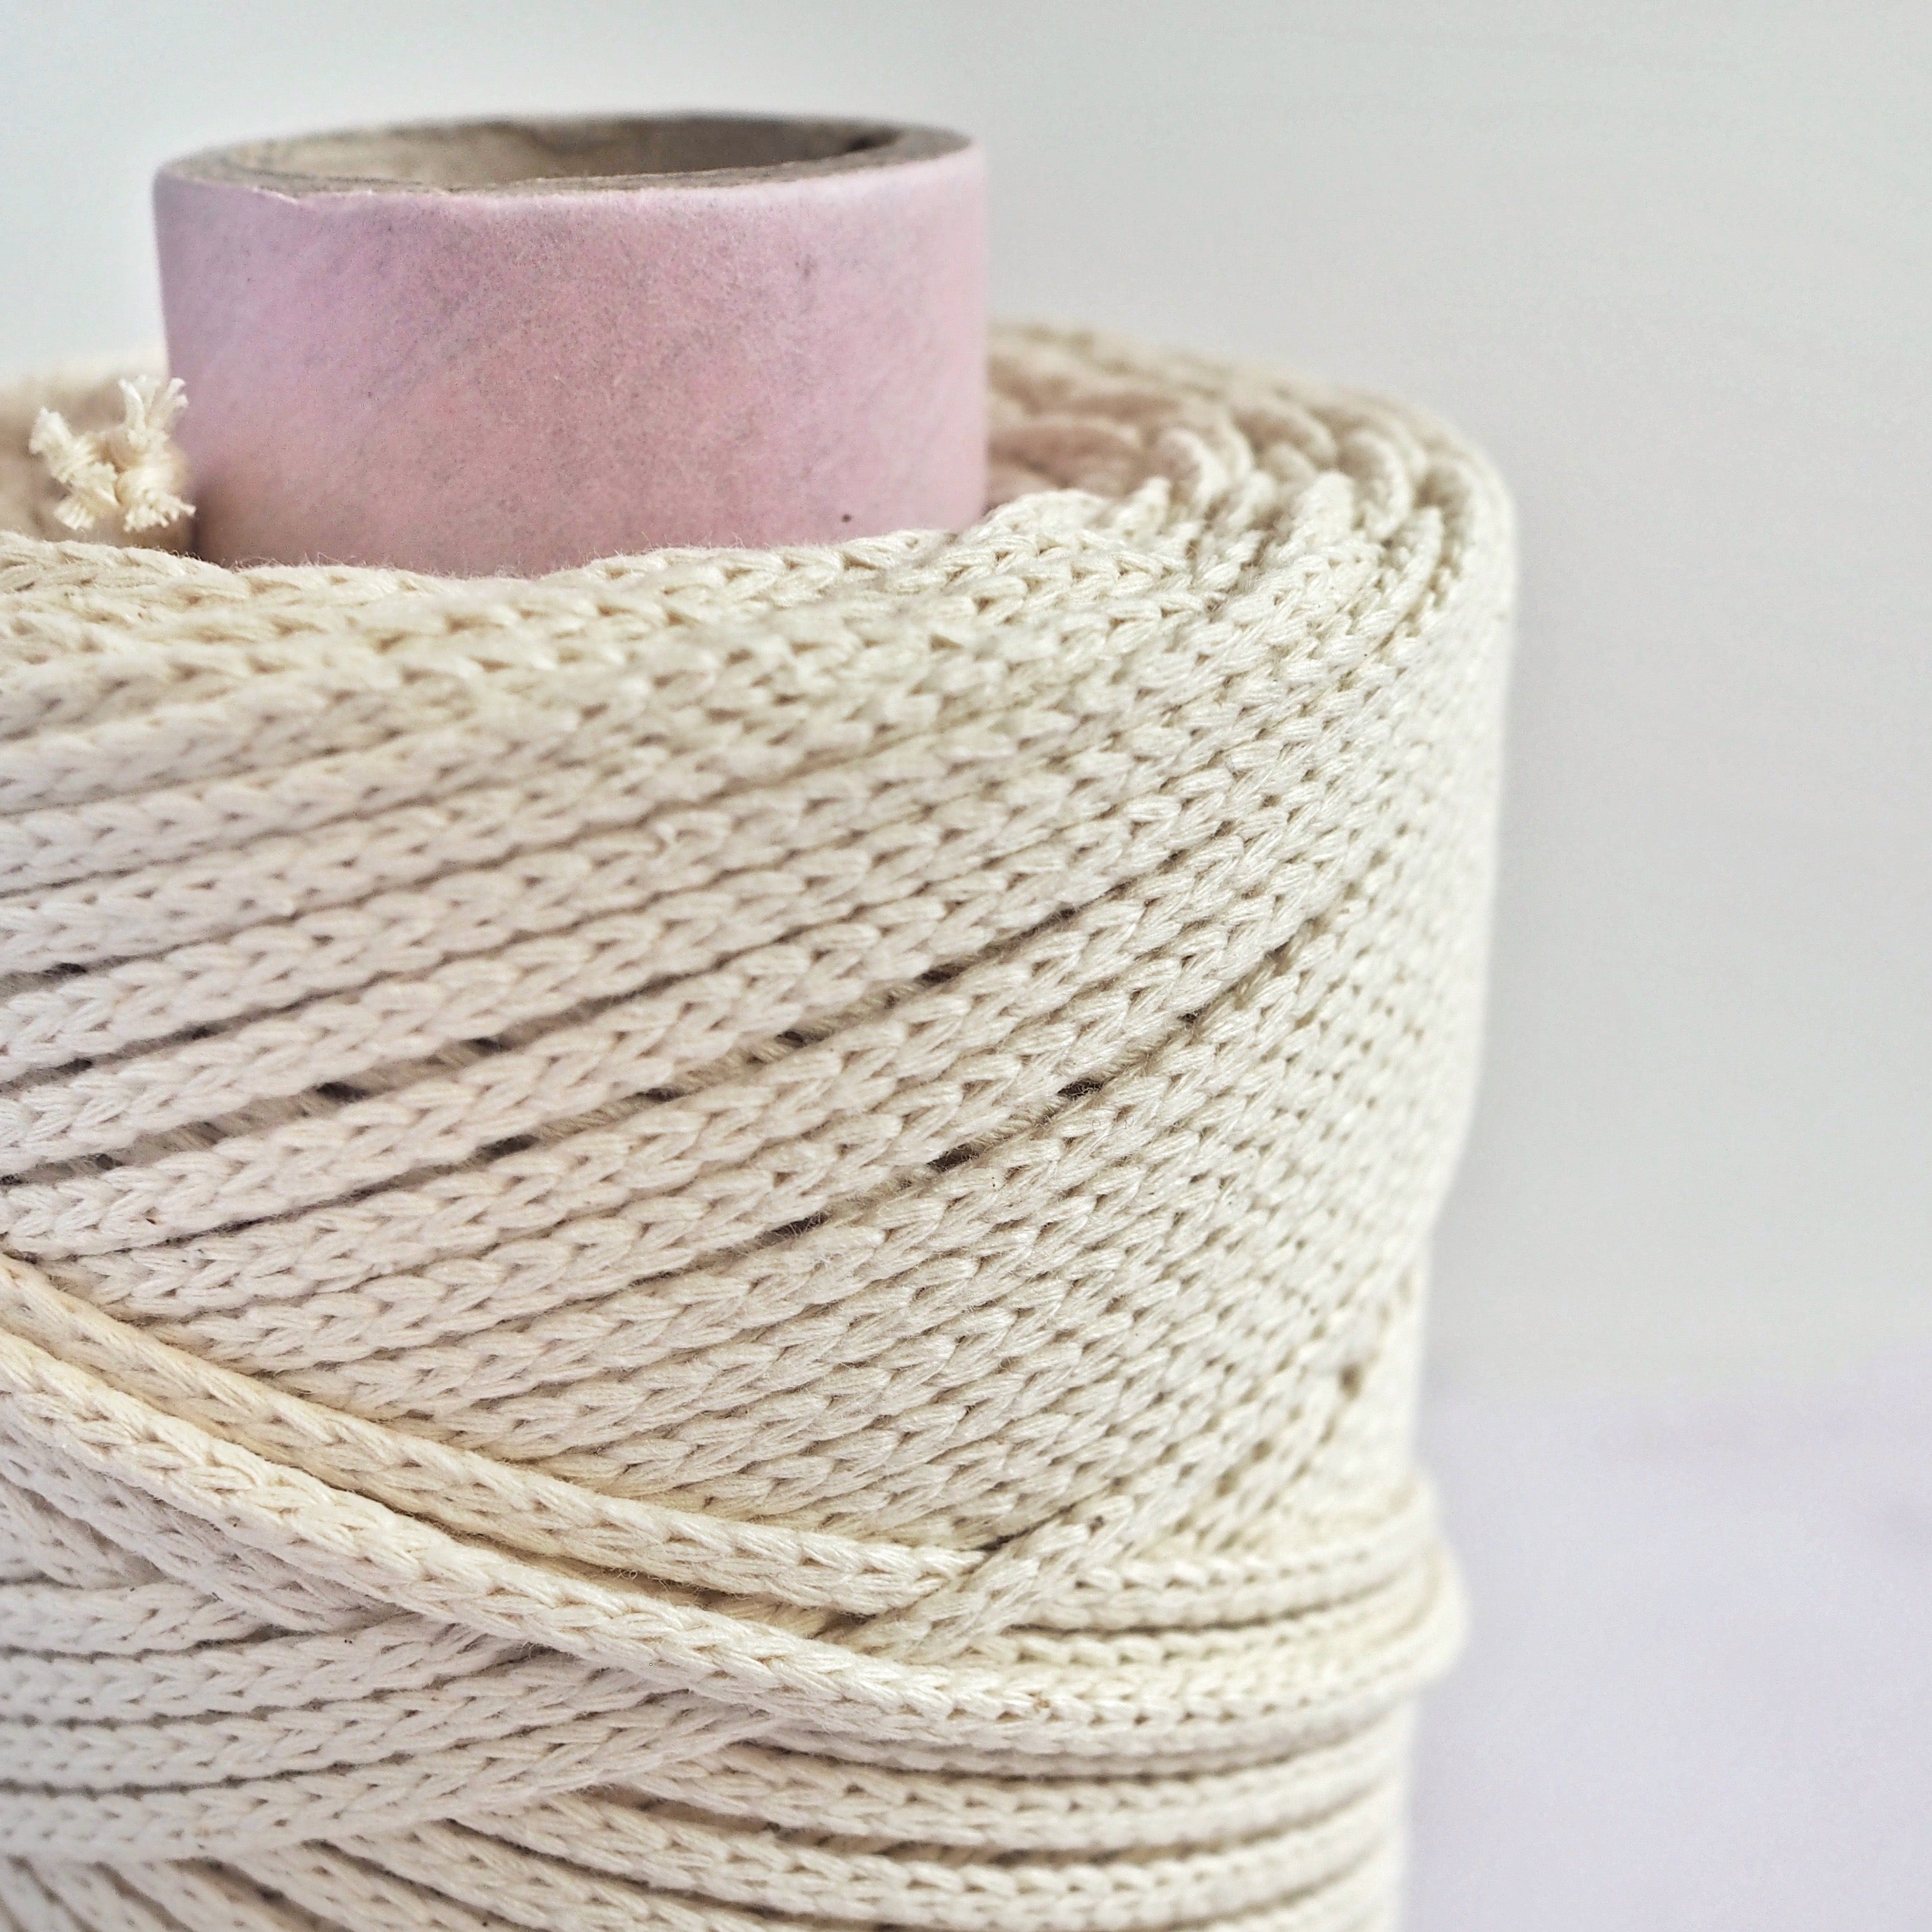 Natural | 3mm Braided Cotton Cord